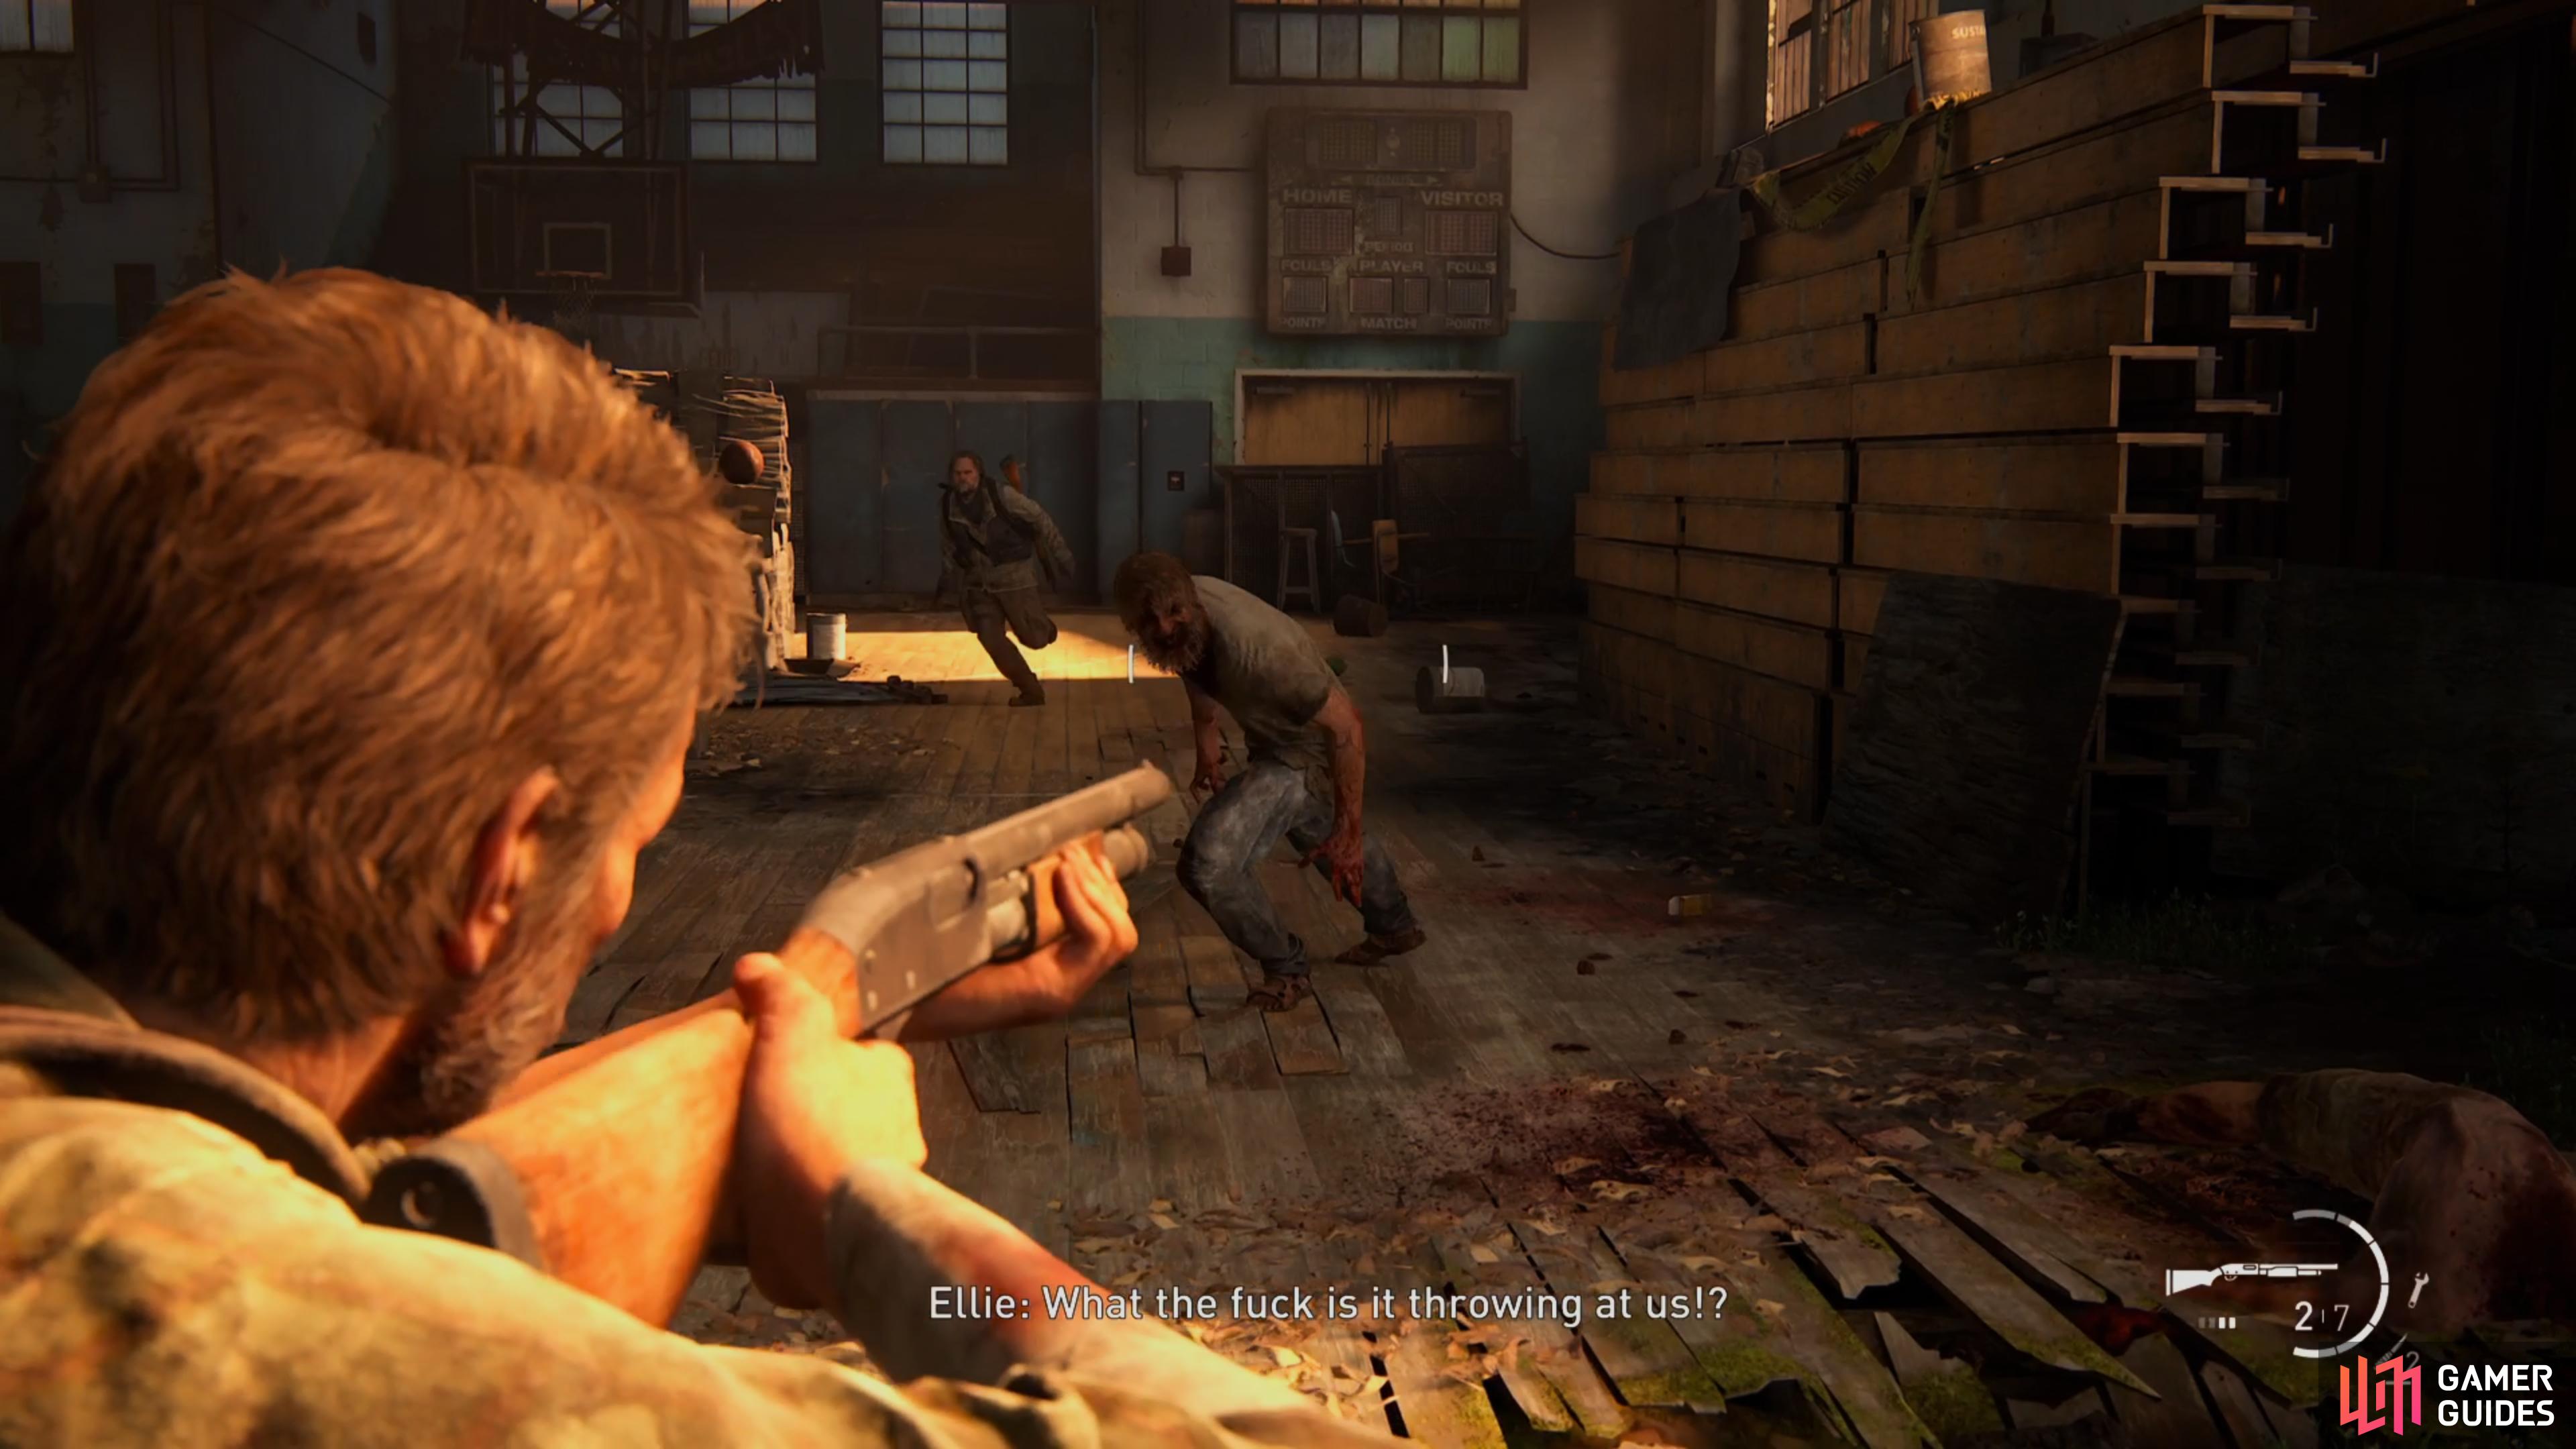 The Last of Us PC Glitch Turns Bill's Home Into a Rave